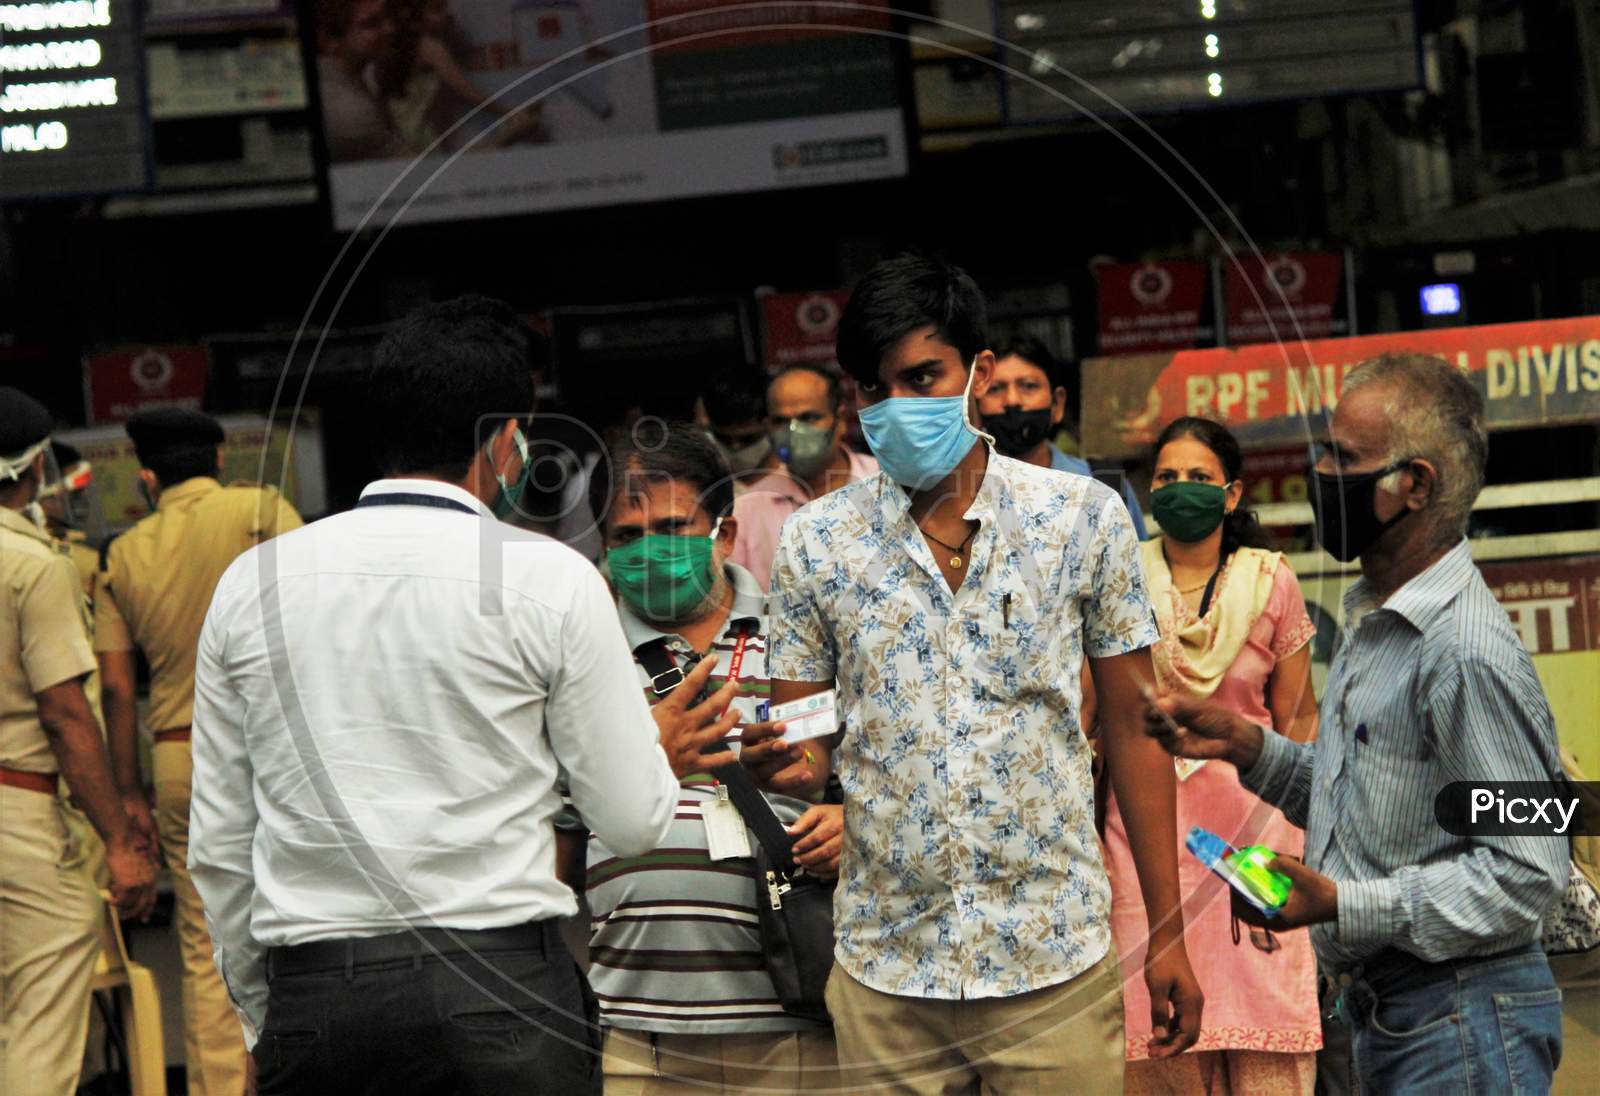 A railway official checks the ID cards of the commuters before they board the trains, at Churchgate station, after the government eased a nationwide lockdown that was imposed as a preventive measure against the COVID-19 coronavirus, at Churchgate station, in Mumbai, India, on June 16, 2020.